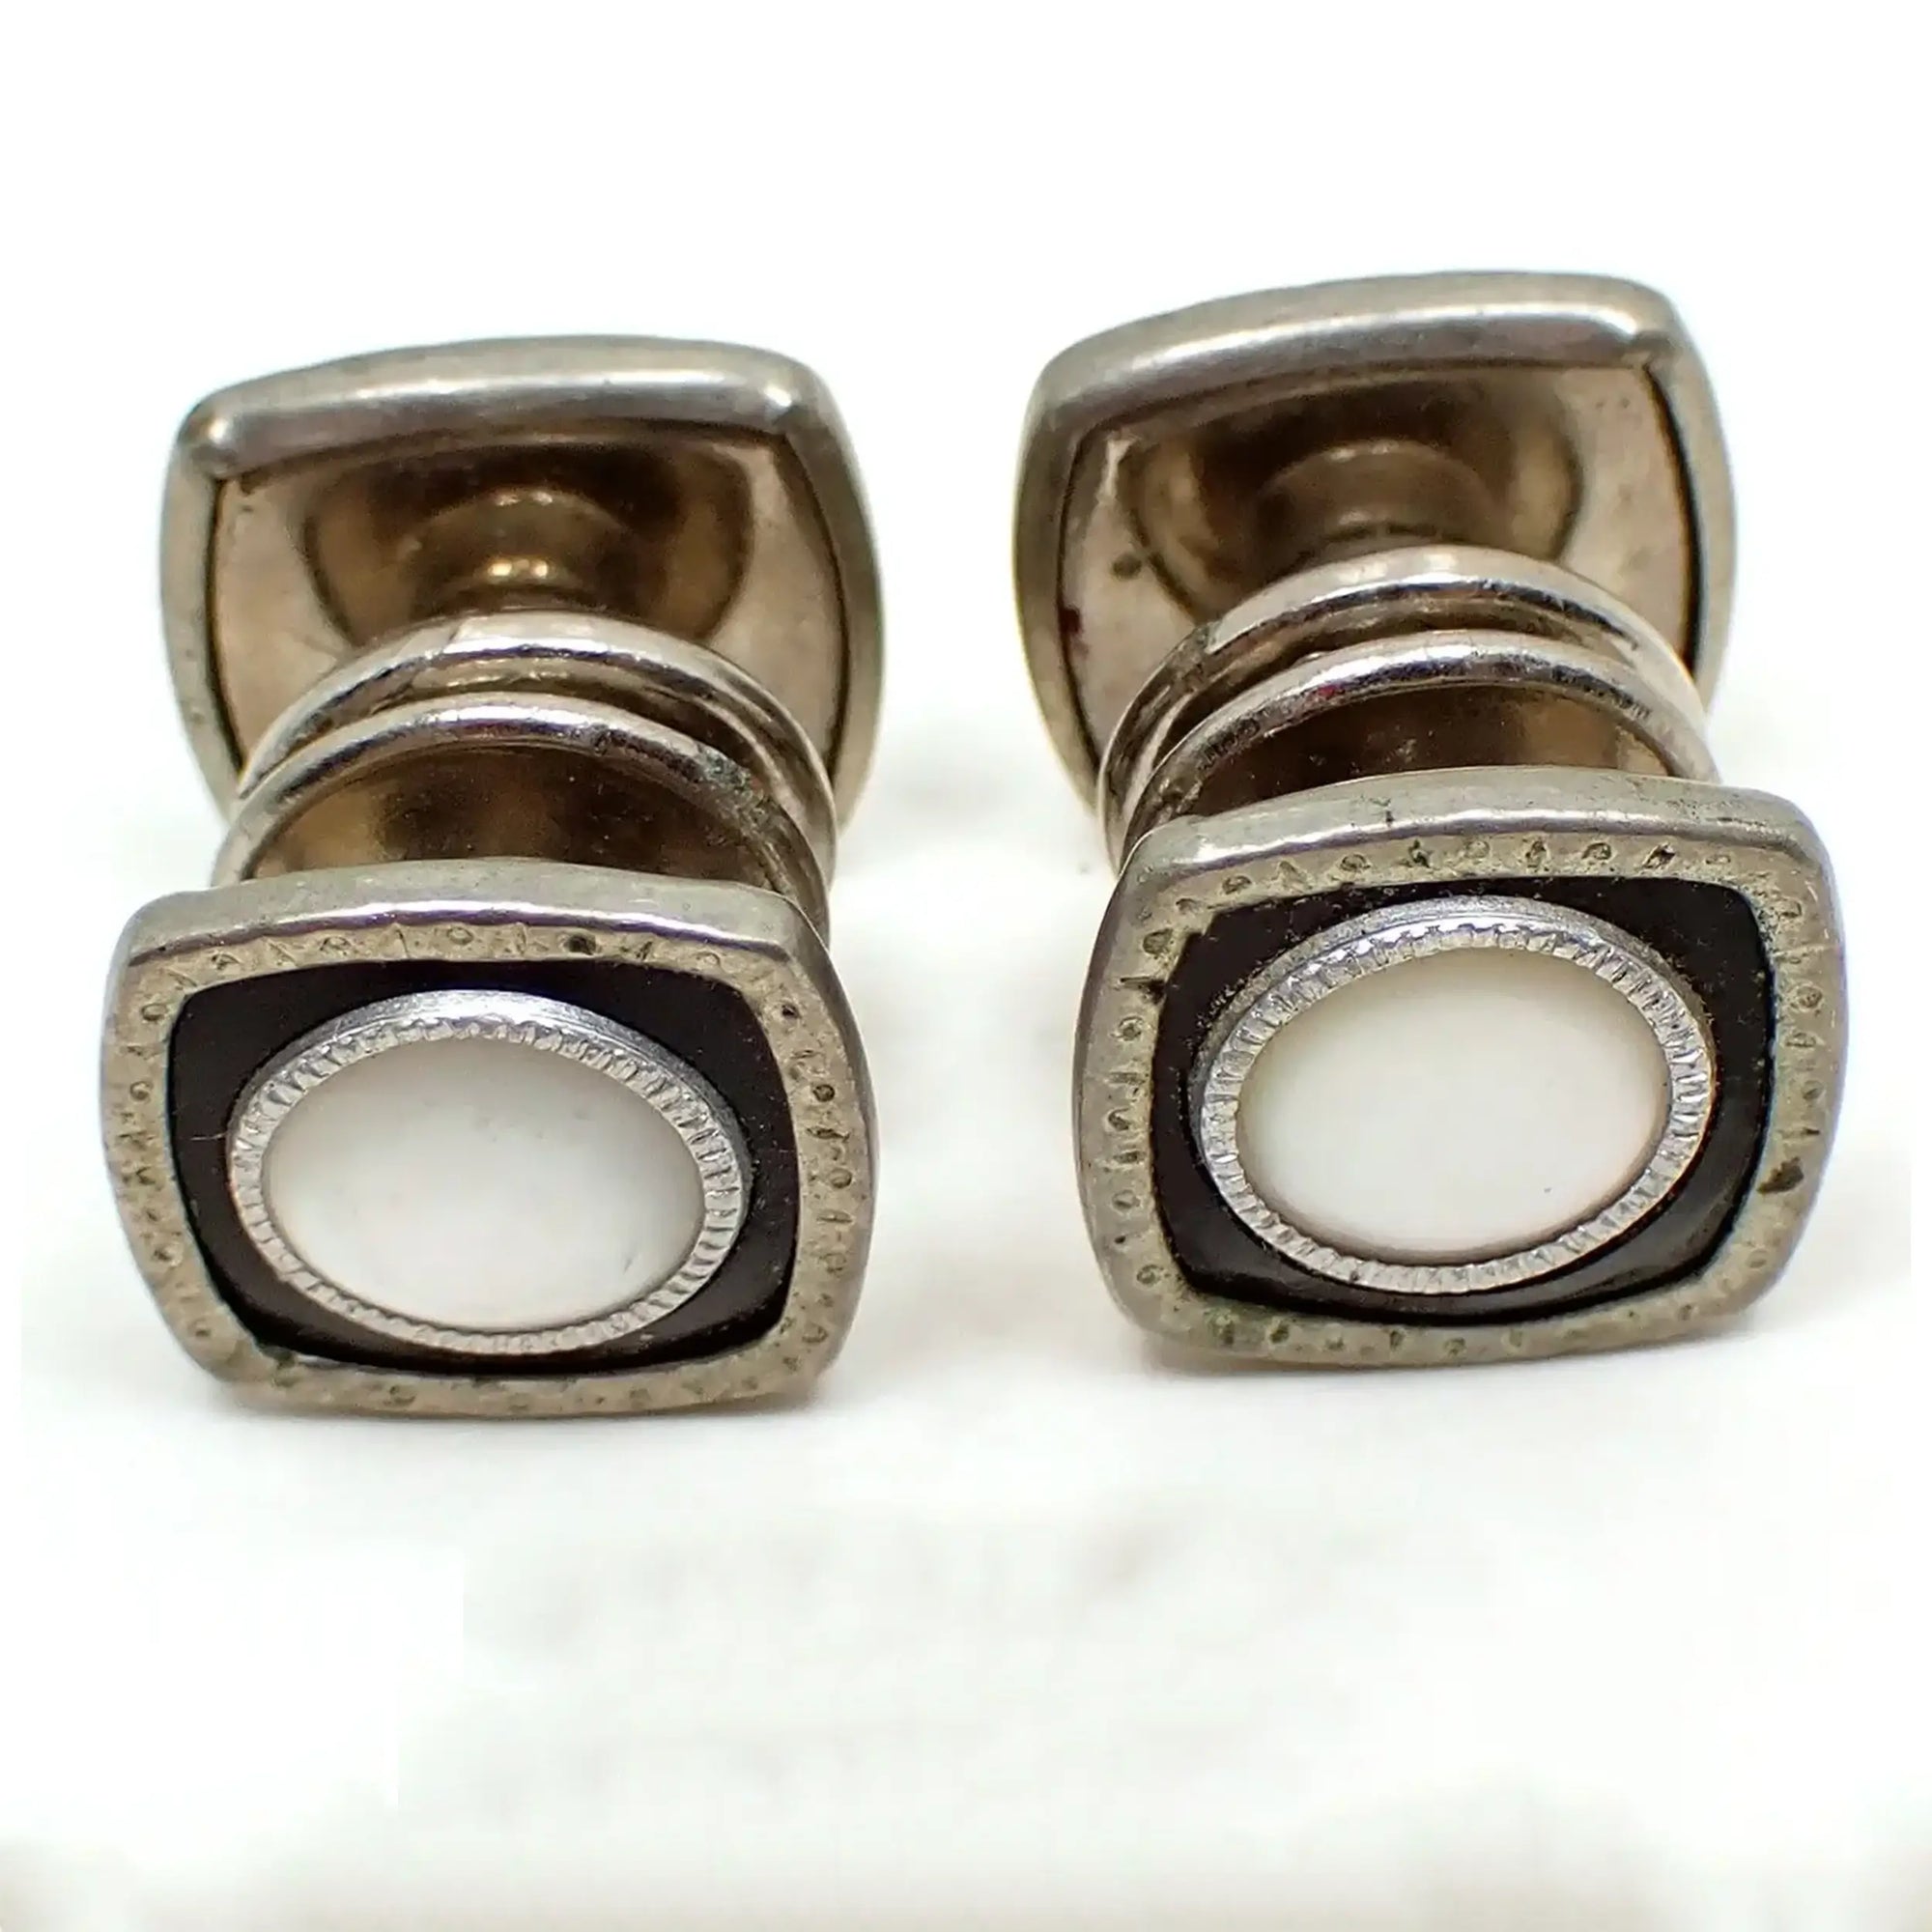 Enlarged angled view of the Art Deco snap together cufflinks. They are silver tone in color and are square in shape with rounded edges. There are black onyx gemstone fronts with a round area of mother of pearl shell in the middle. A few small dark spots can be seen on the outer edge of the metal and a small spot of verdigris can be seen where the two sides snap together in the middle.